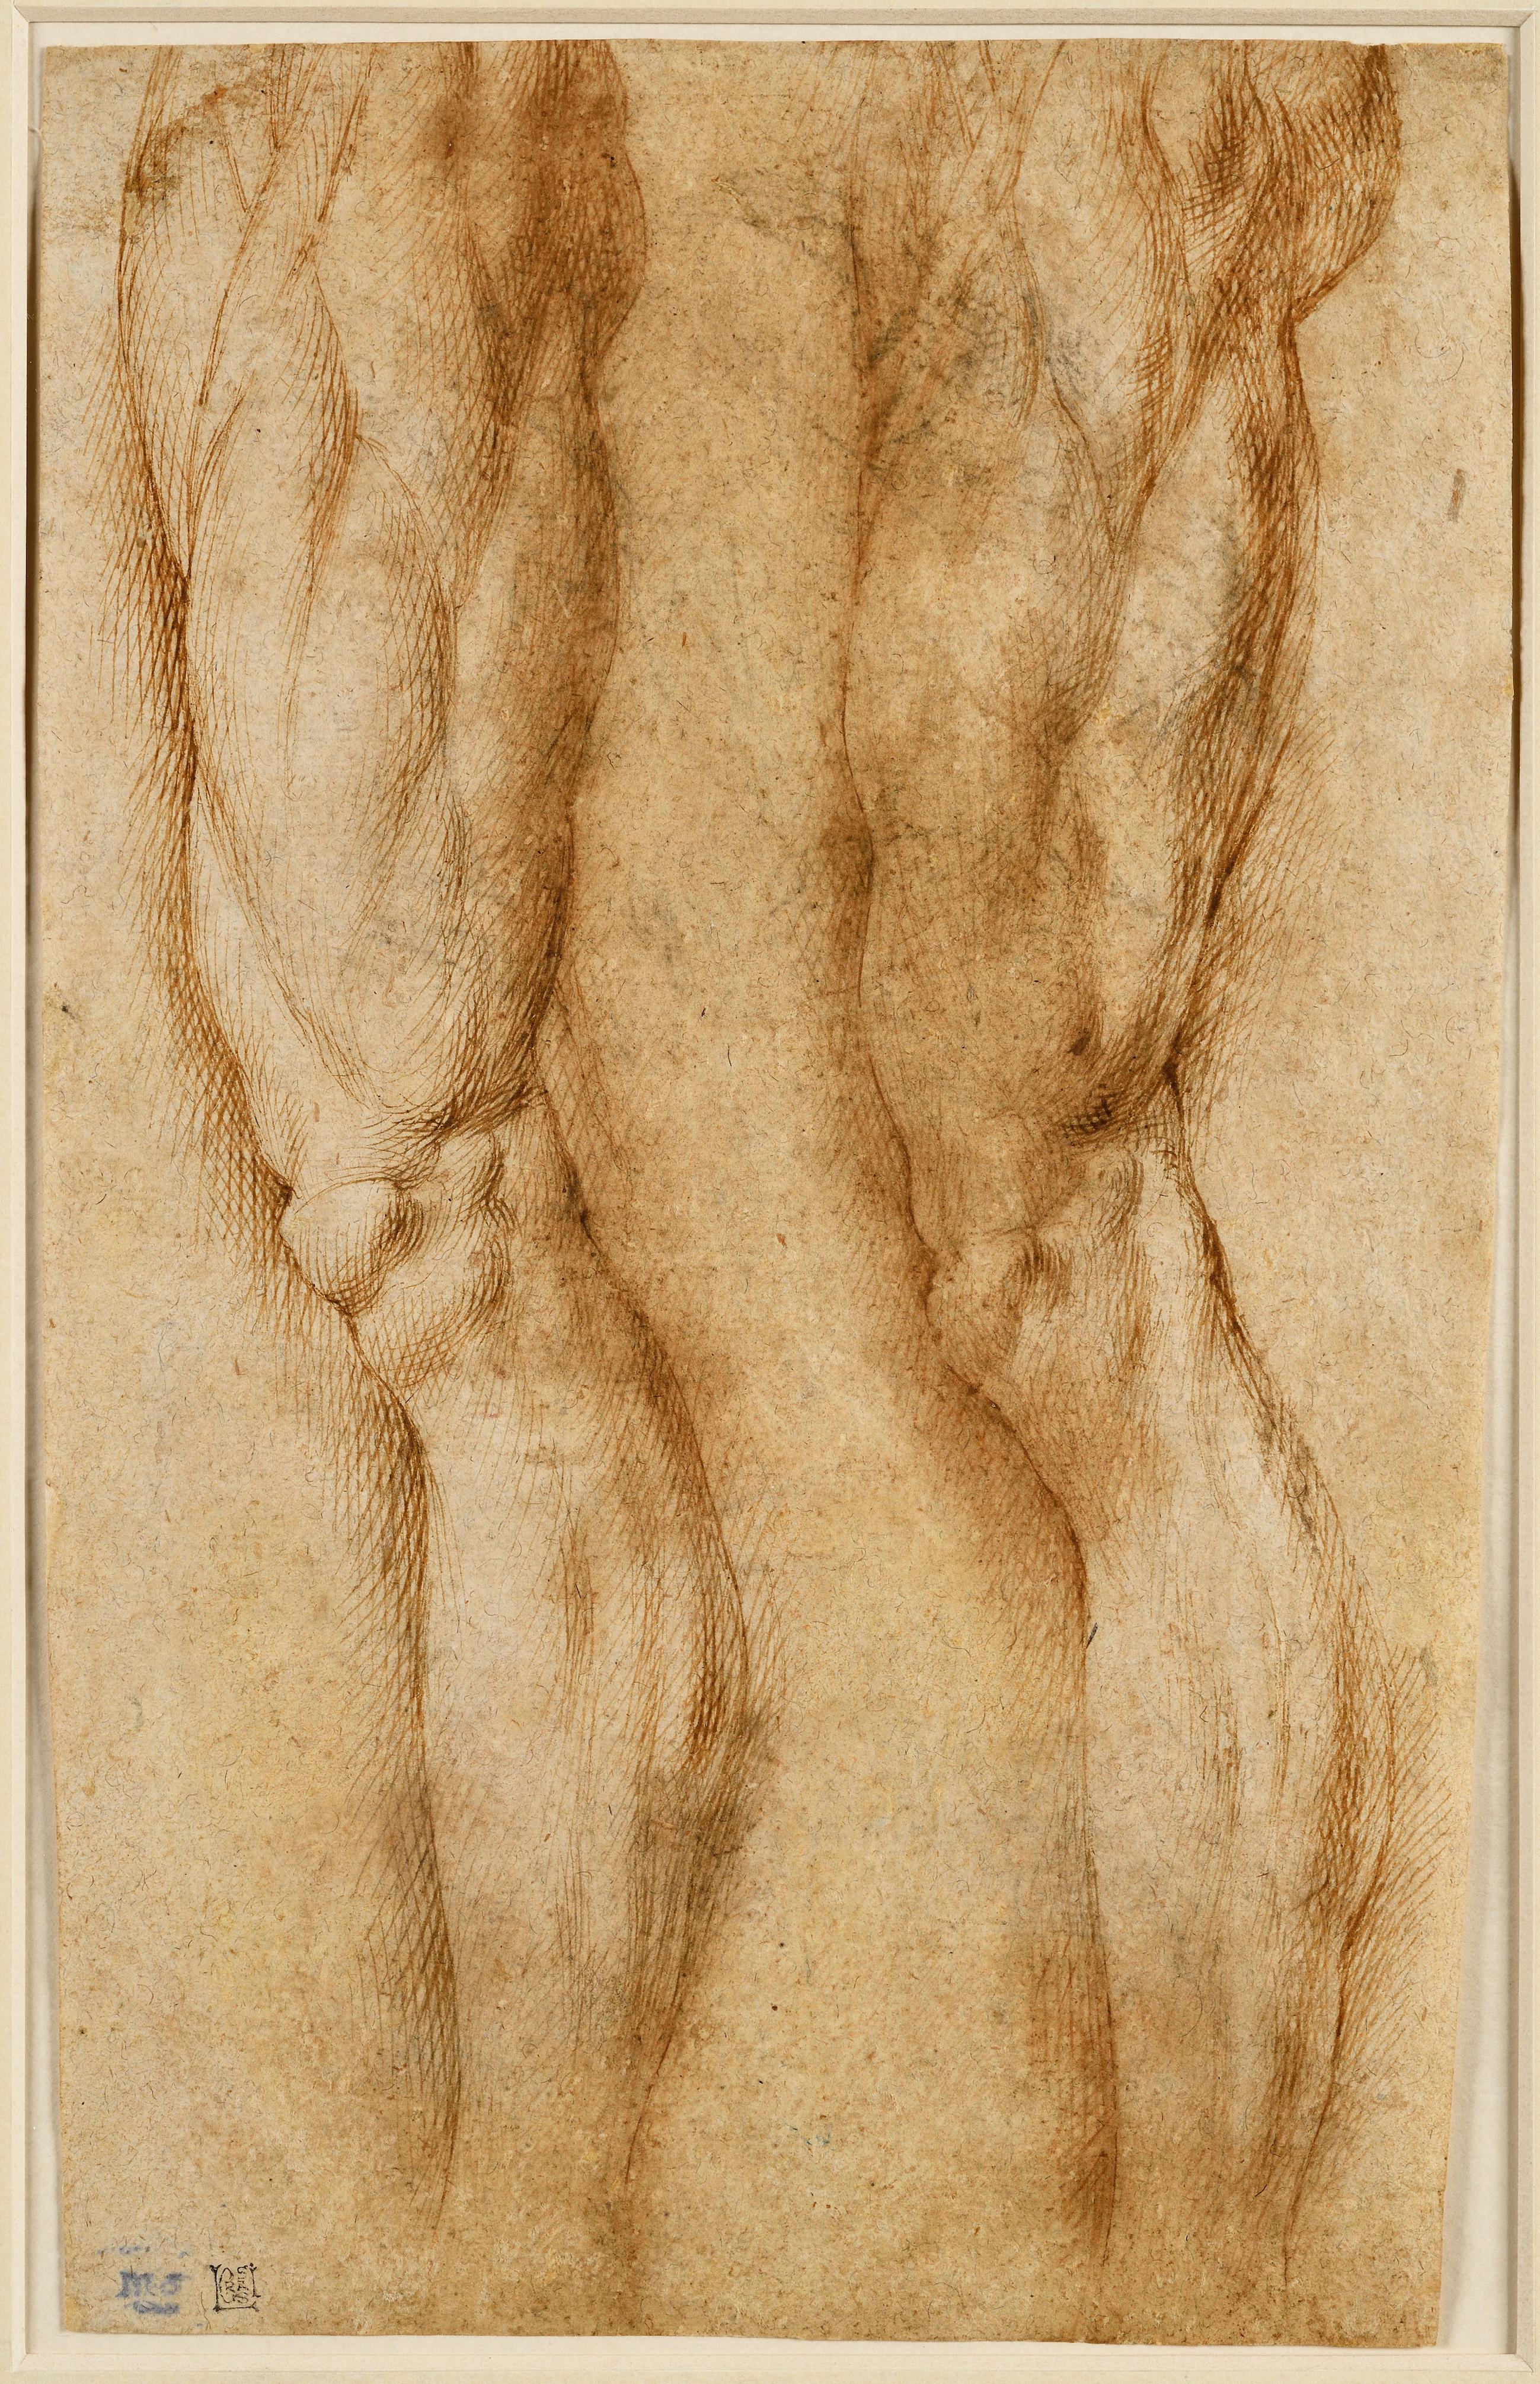 BARTOLOMEO PASSAROTTI
(Bologna 1529 - 1592)
Study of two legs

Pen and brown ink, over black chalk

34,5 x 21,5 cm
Bears lower left the collector mark of Maurice Marignane (L. 1872) and the collector mark of Luigi Grassi (L.